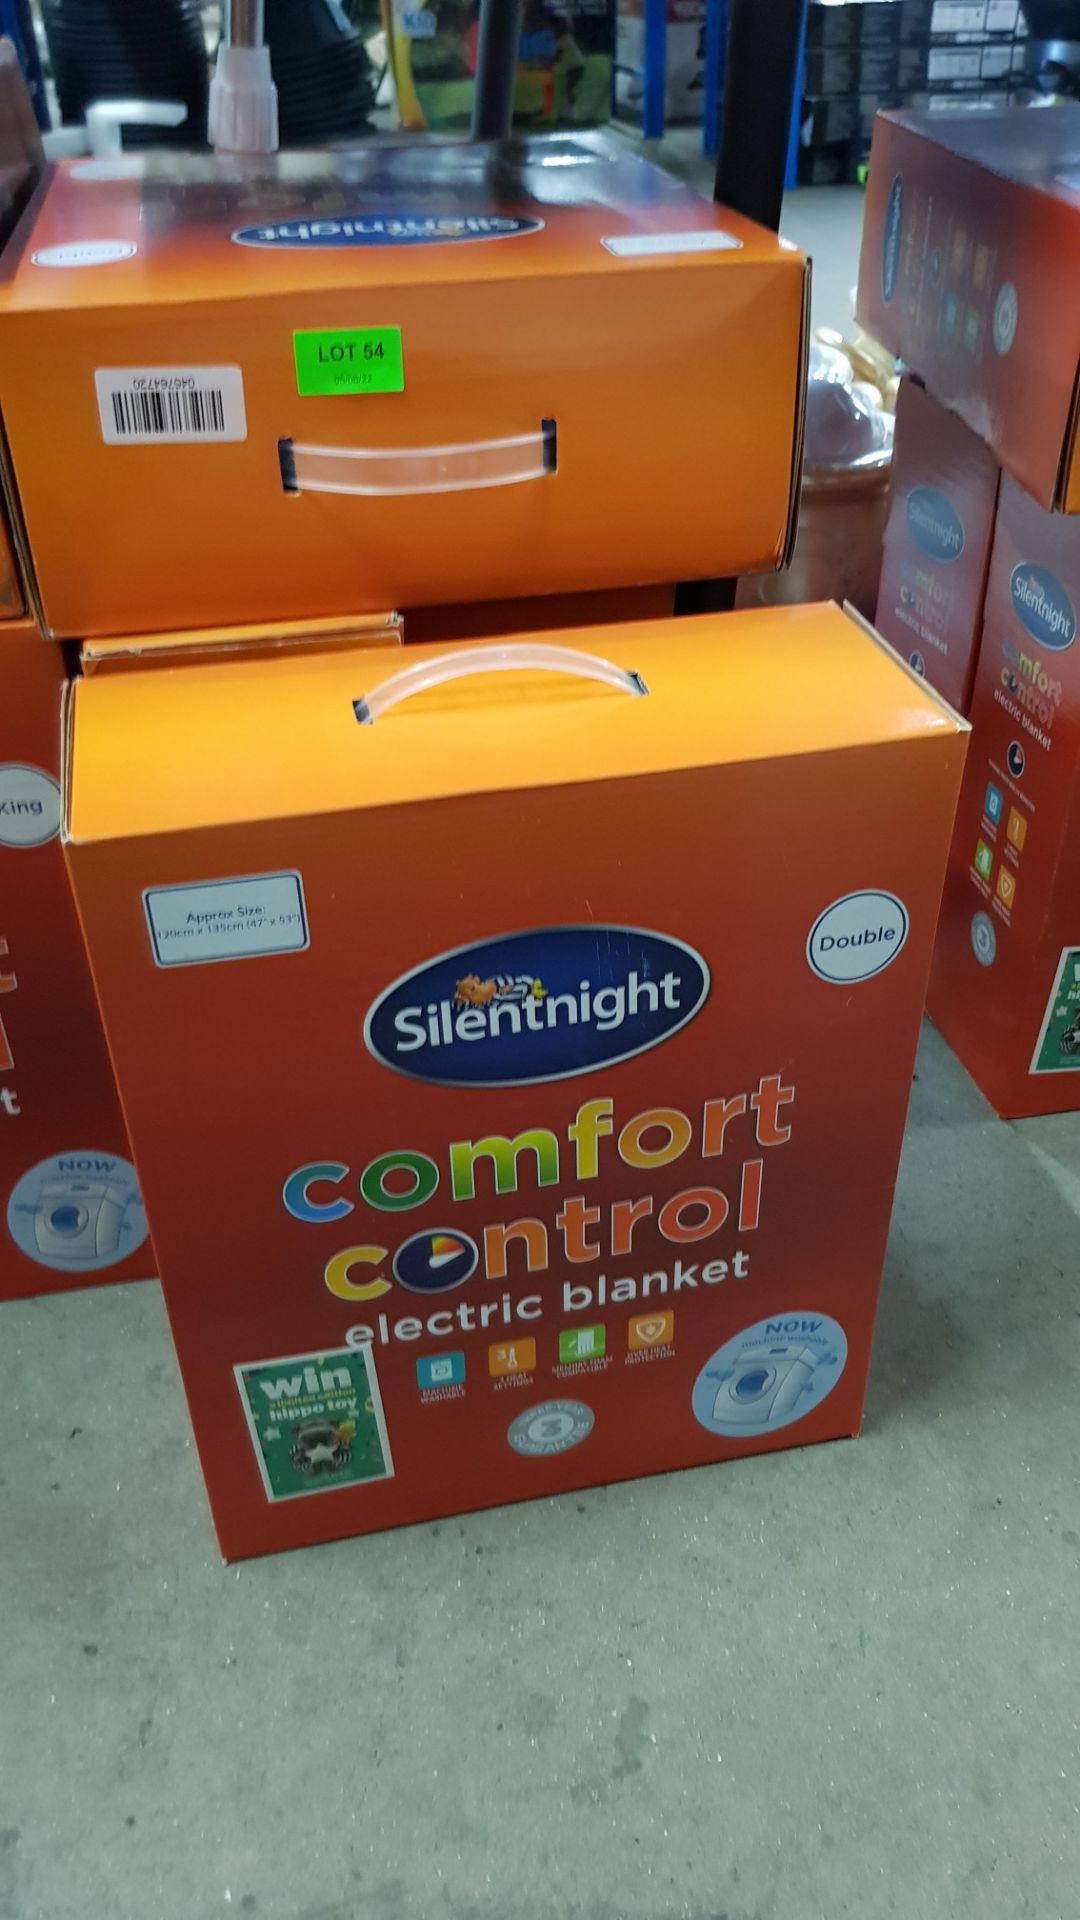 (54/8I) 4x Silentnight Comfort Control Electric Blanket Double RRP £35 Each. (All Units Appear - Image 2 of 2